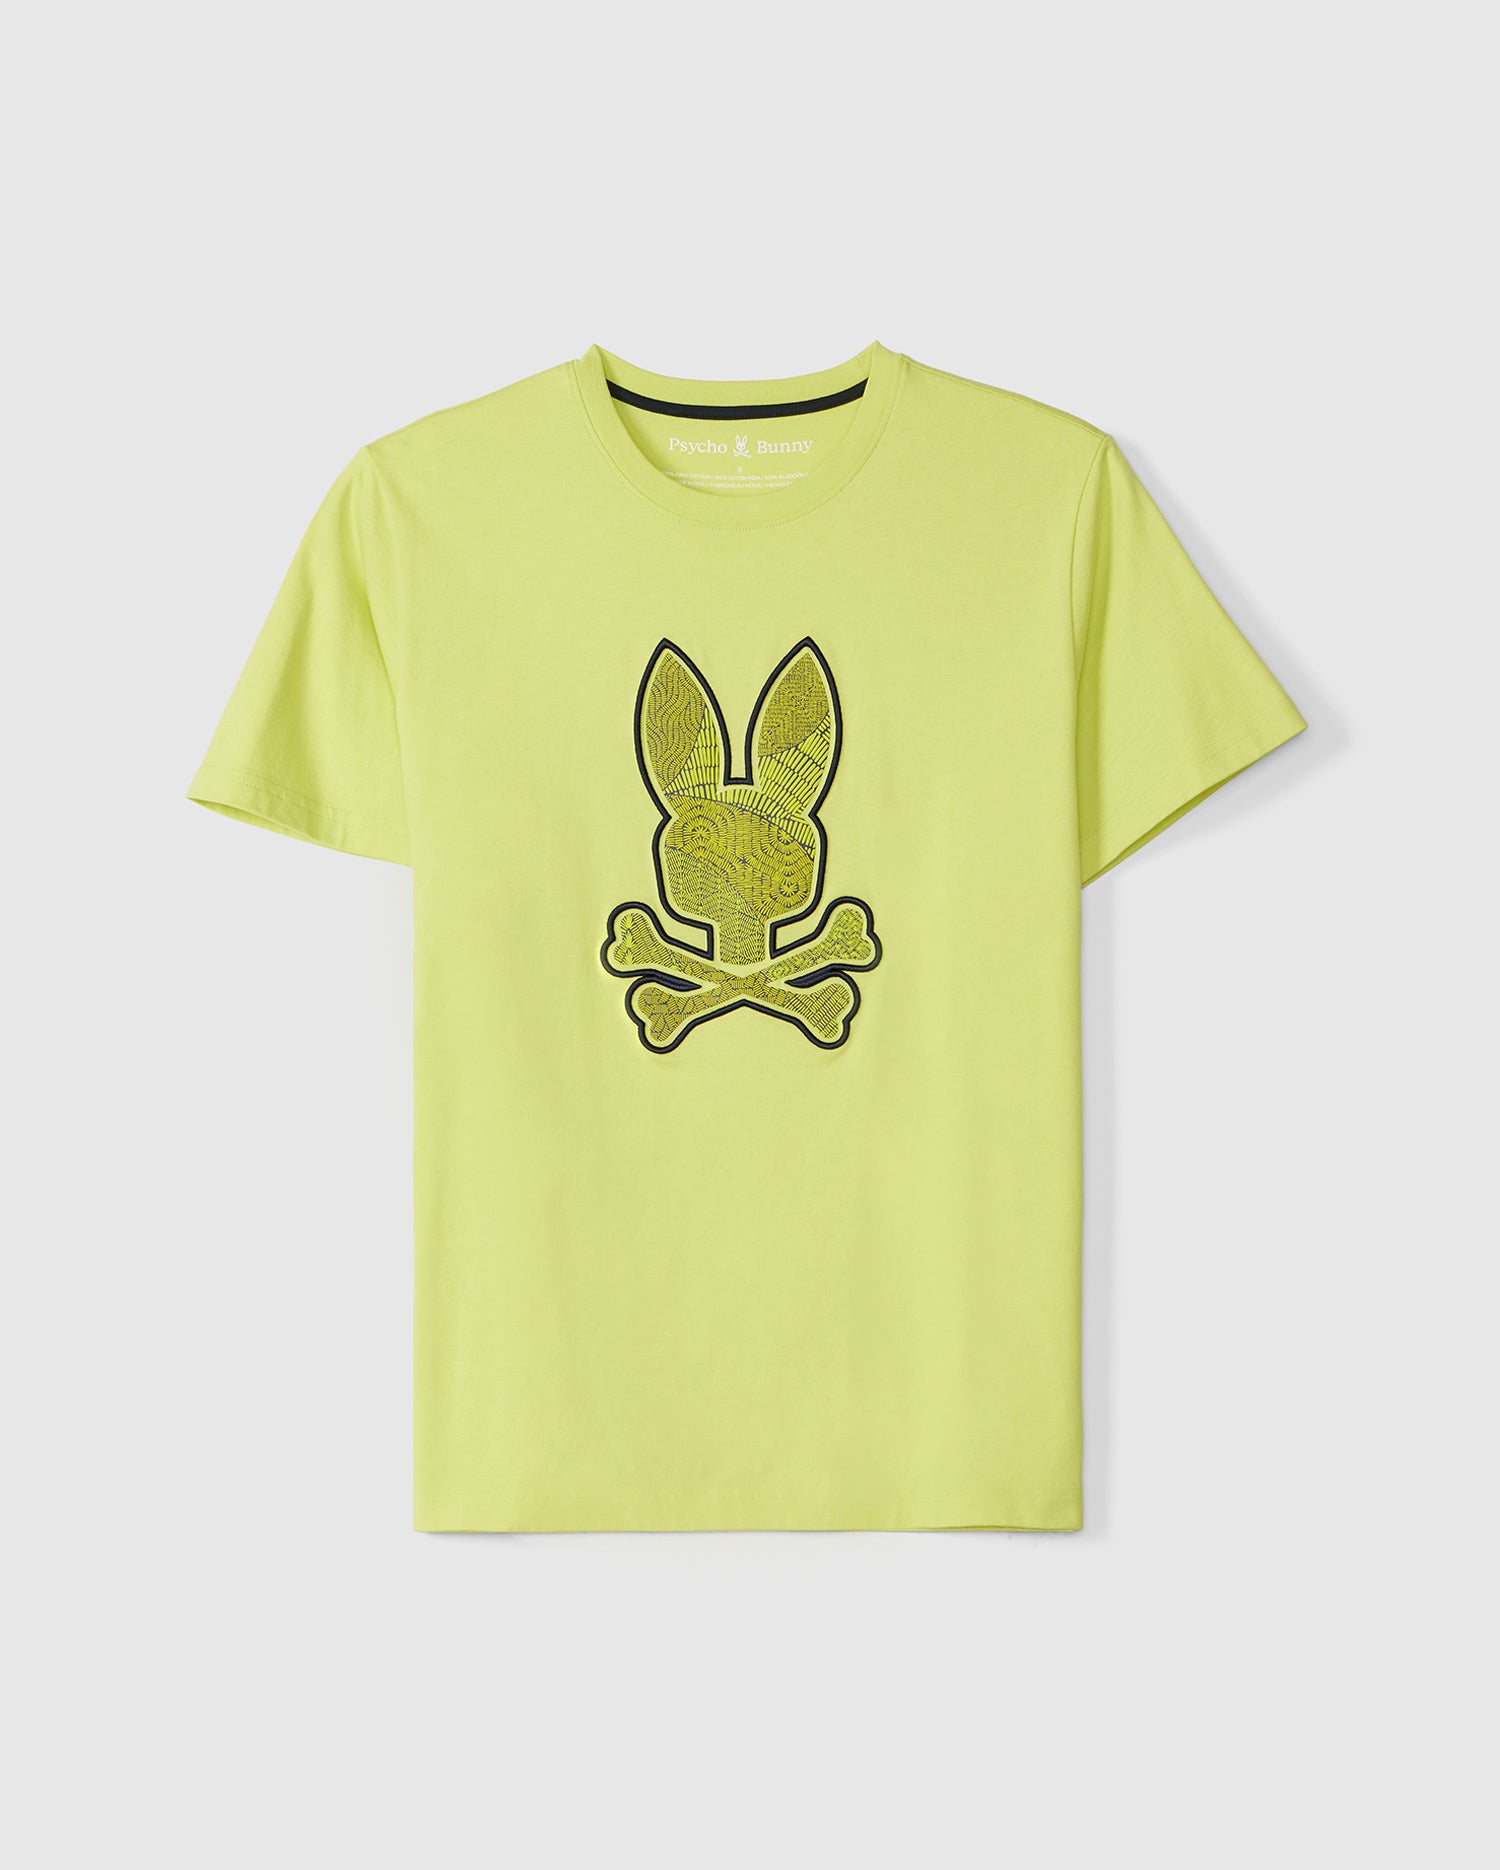 A bright yellow unisex graphic tee with short sleeves featuring a large design on the front. The detailed rabbit head above two crossed bones is outlined in black. Made from soft Pima cotton, the MENS LENOX EMBROIDERED GRAPHIC TEE - B6U405B200 by Psycho Bunny has a relaxed fit and a round neck, perfect for spring style.